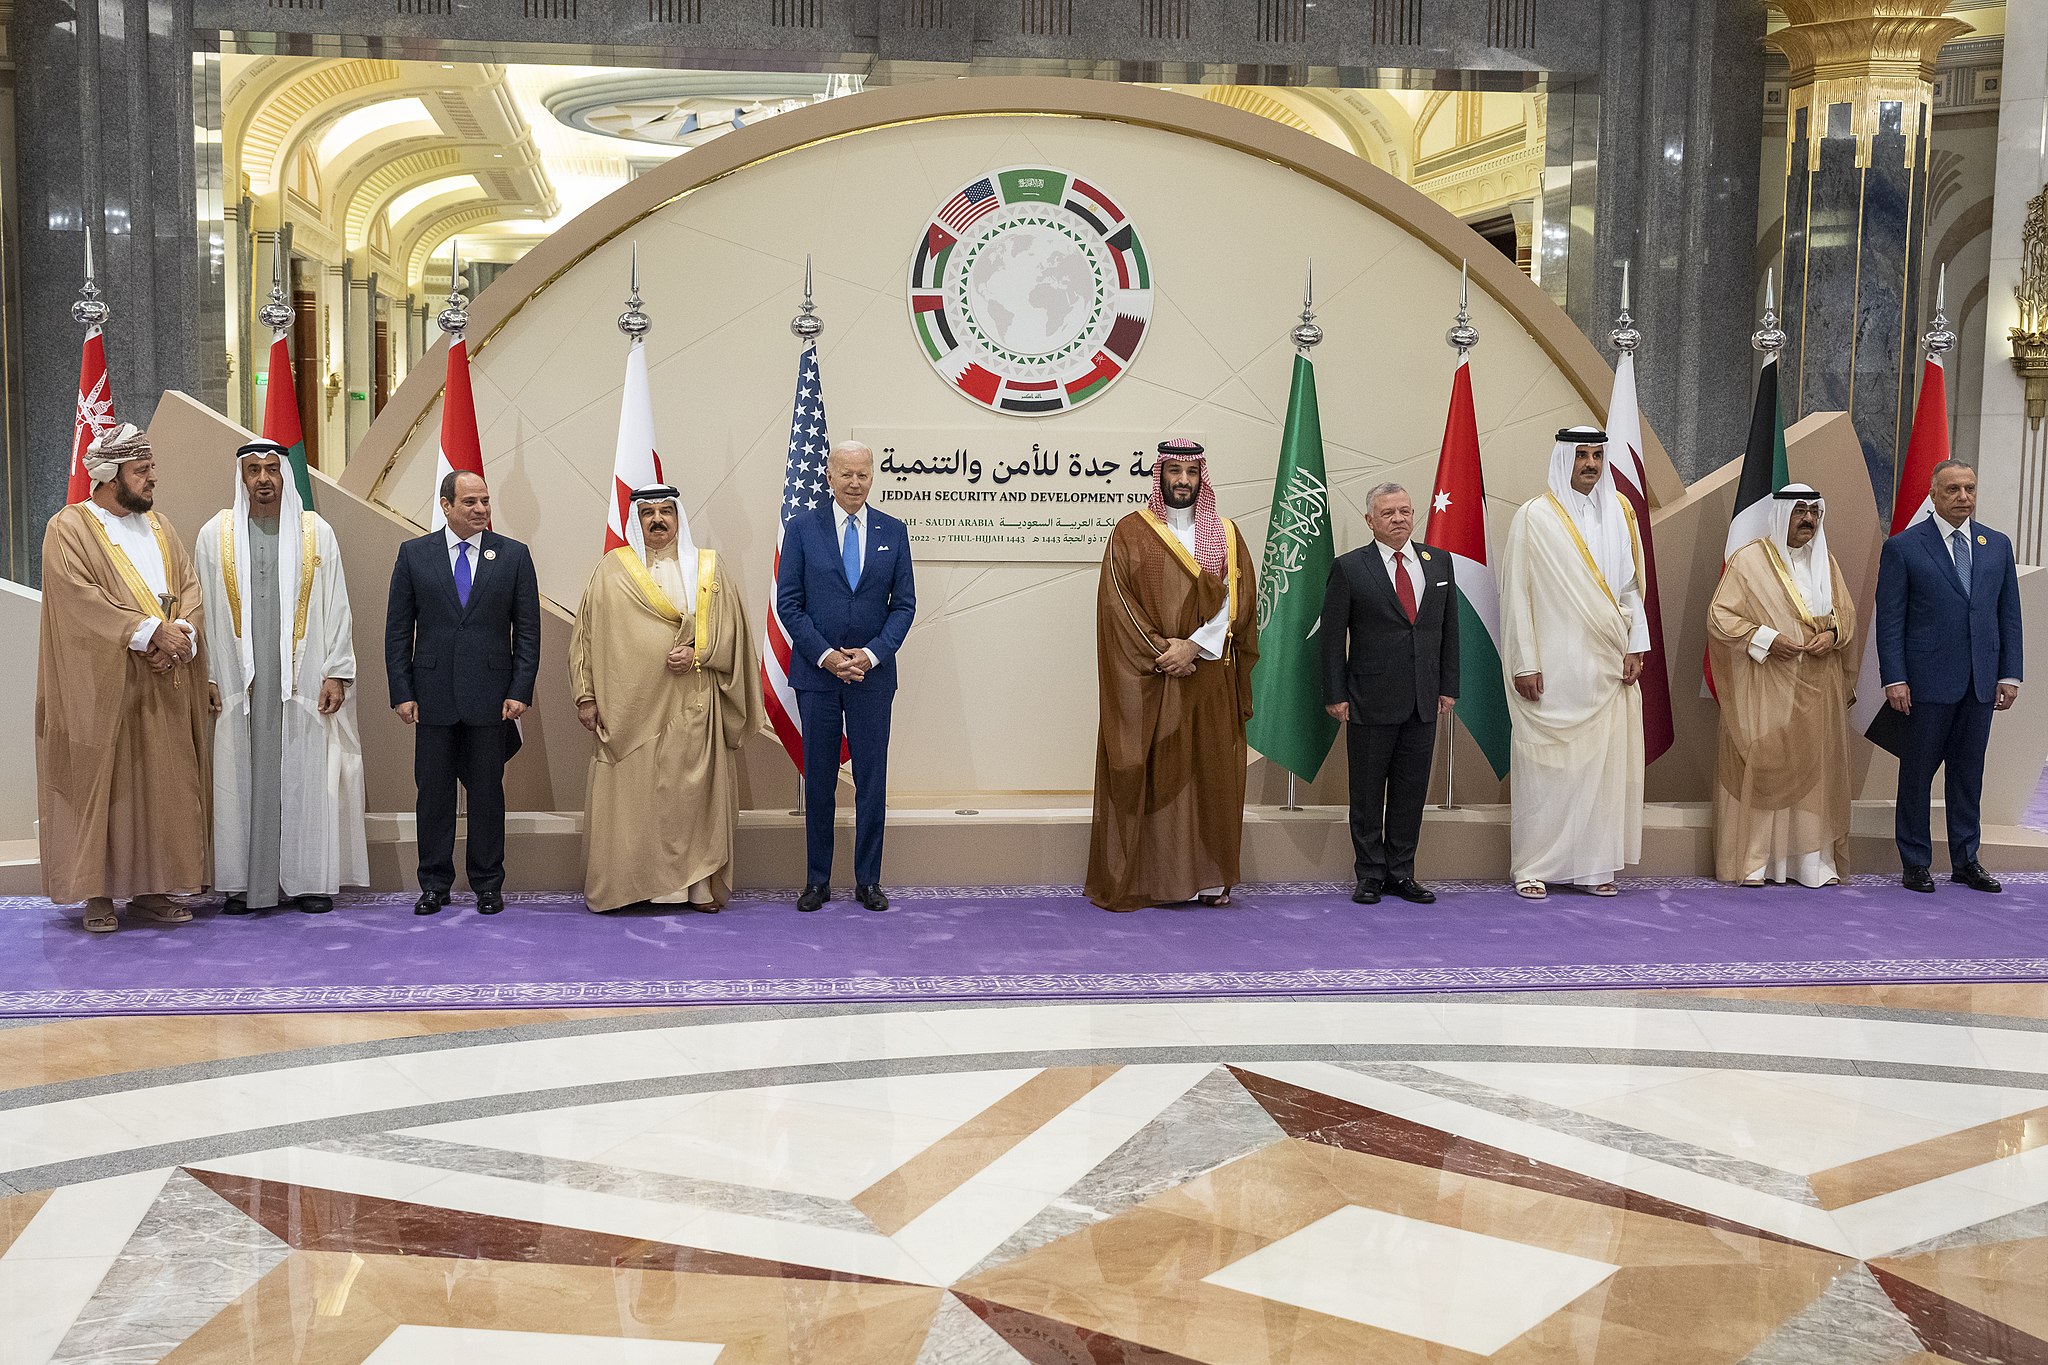 President Joe Biden stands beside leaders of the GCC, Egypt, Iraq, and Jordan at the Jeddah Security and Development Summit, Saudi Arabia, July 17, 2022. (The White House)